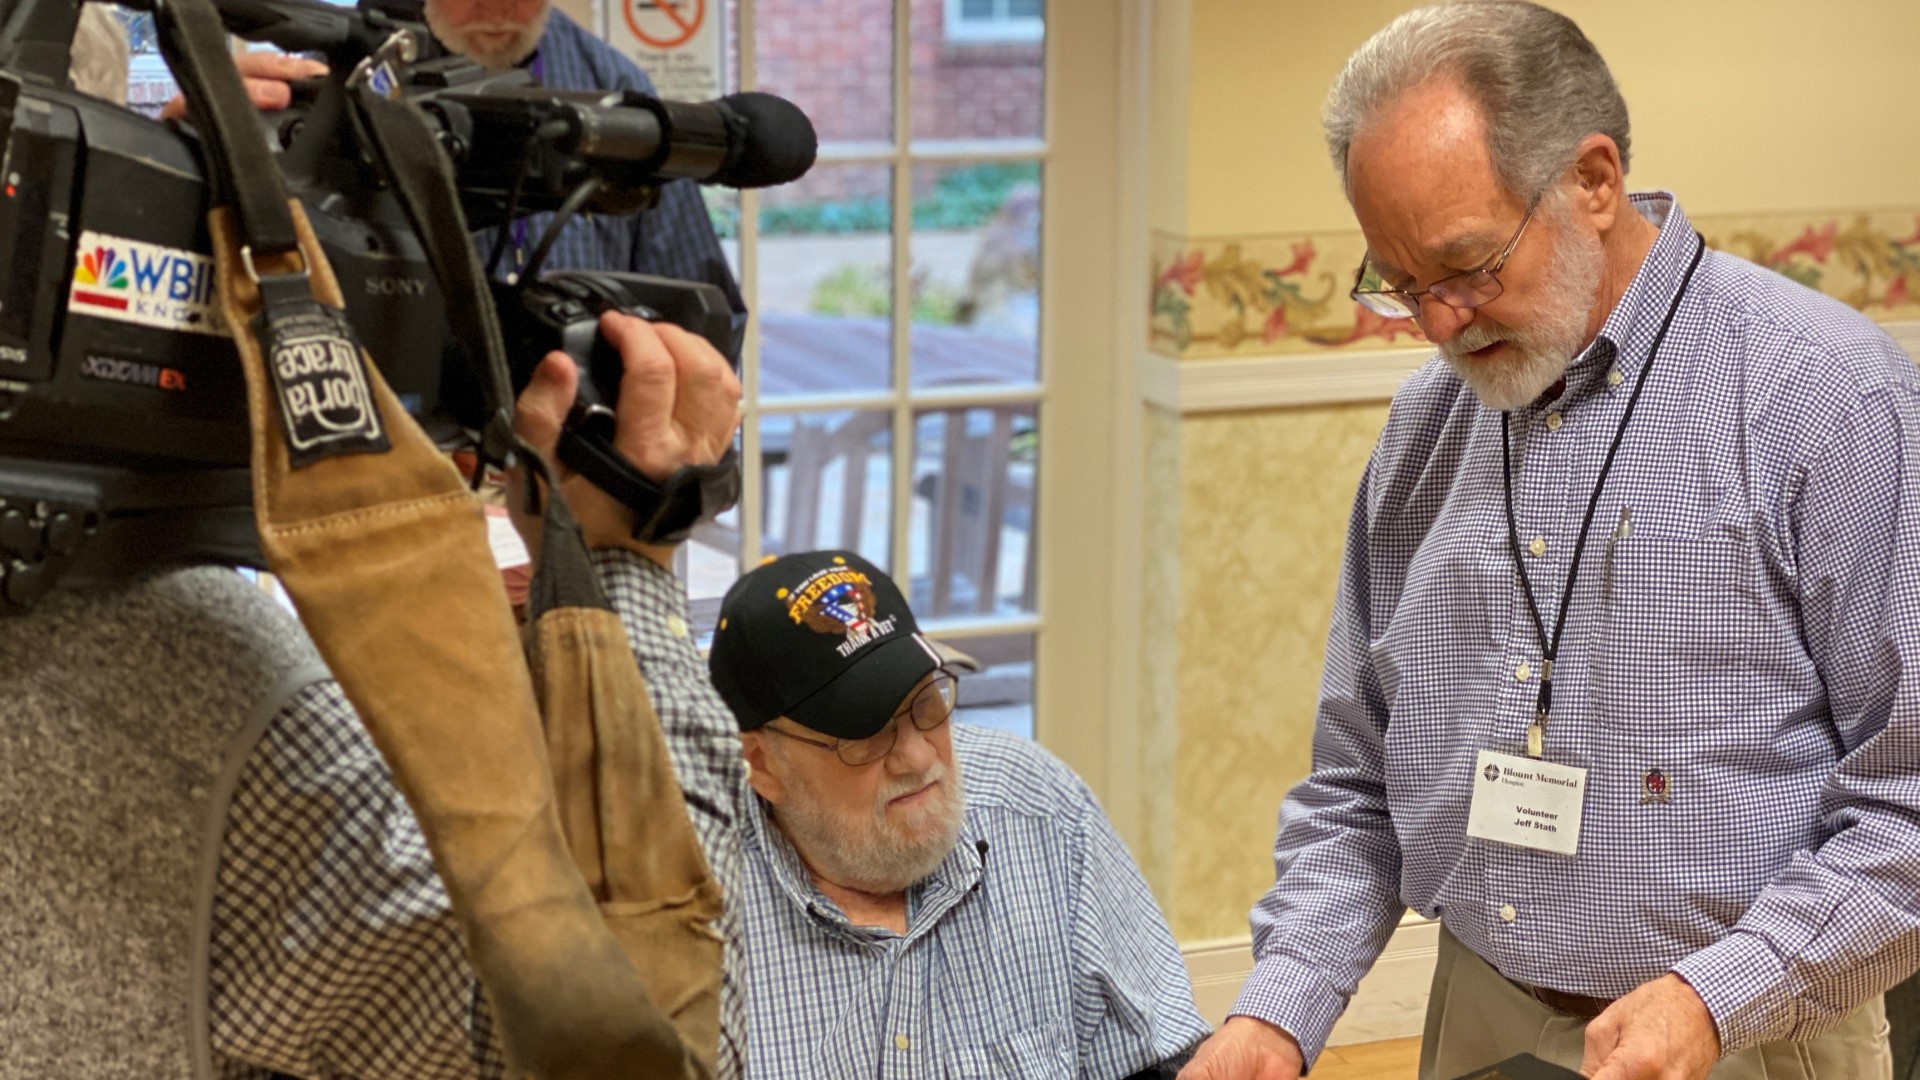 For almost 10 years military veterans in Blount County have received special tributes in their dying days from hospice volunteers who are also veterans.